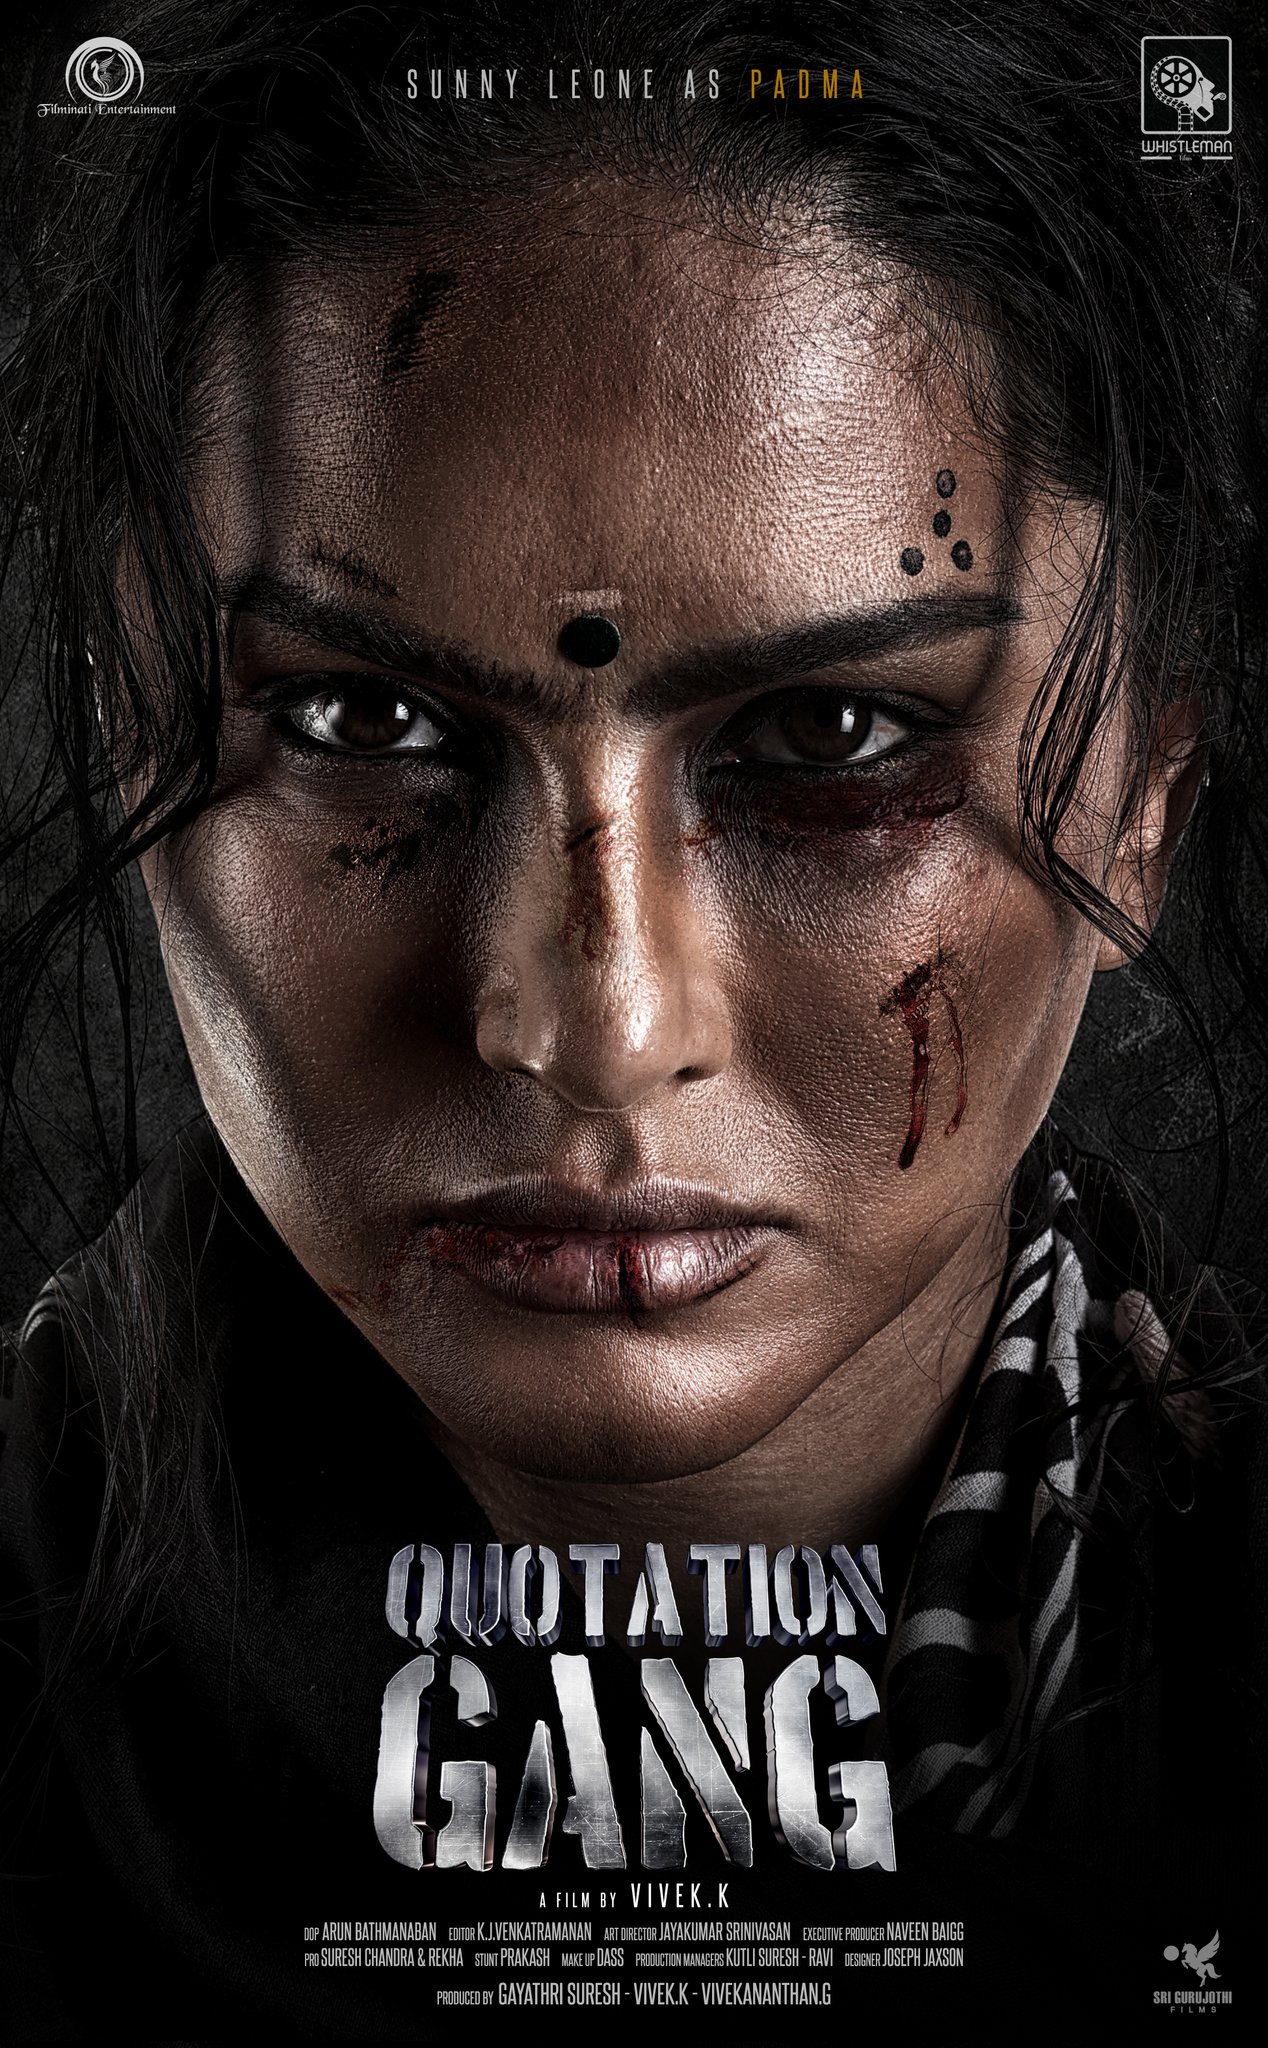 The first look of the movie‘ Quotation Gang ’revealed